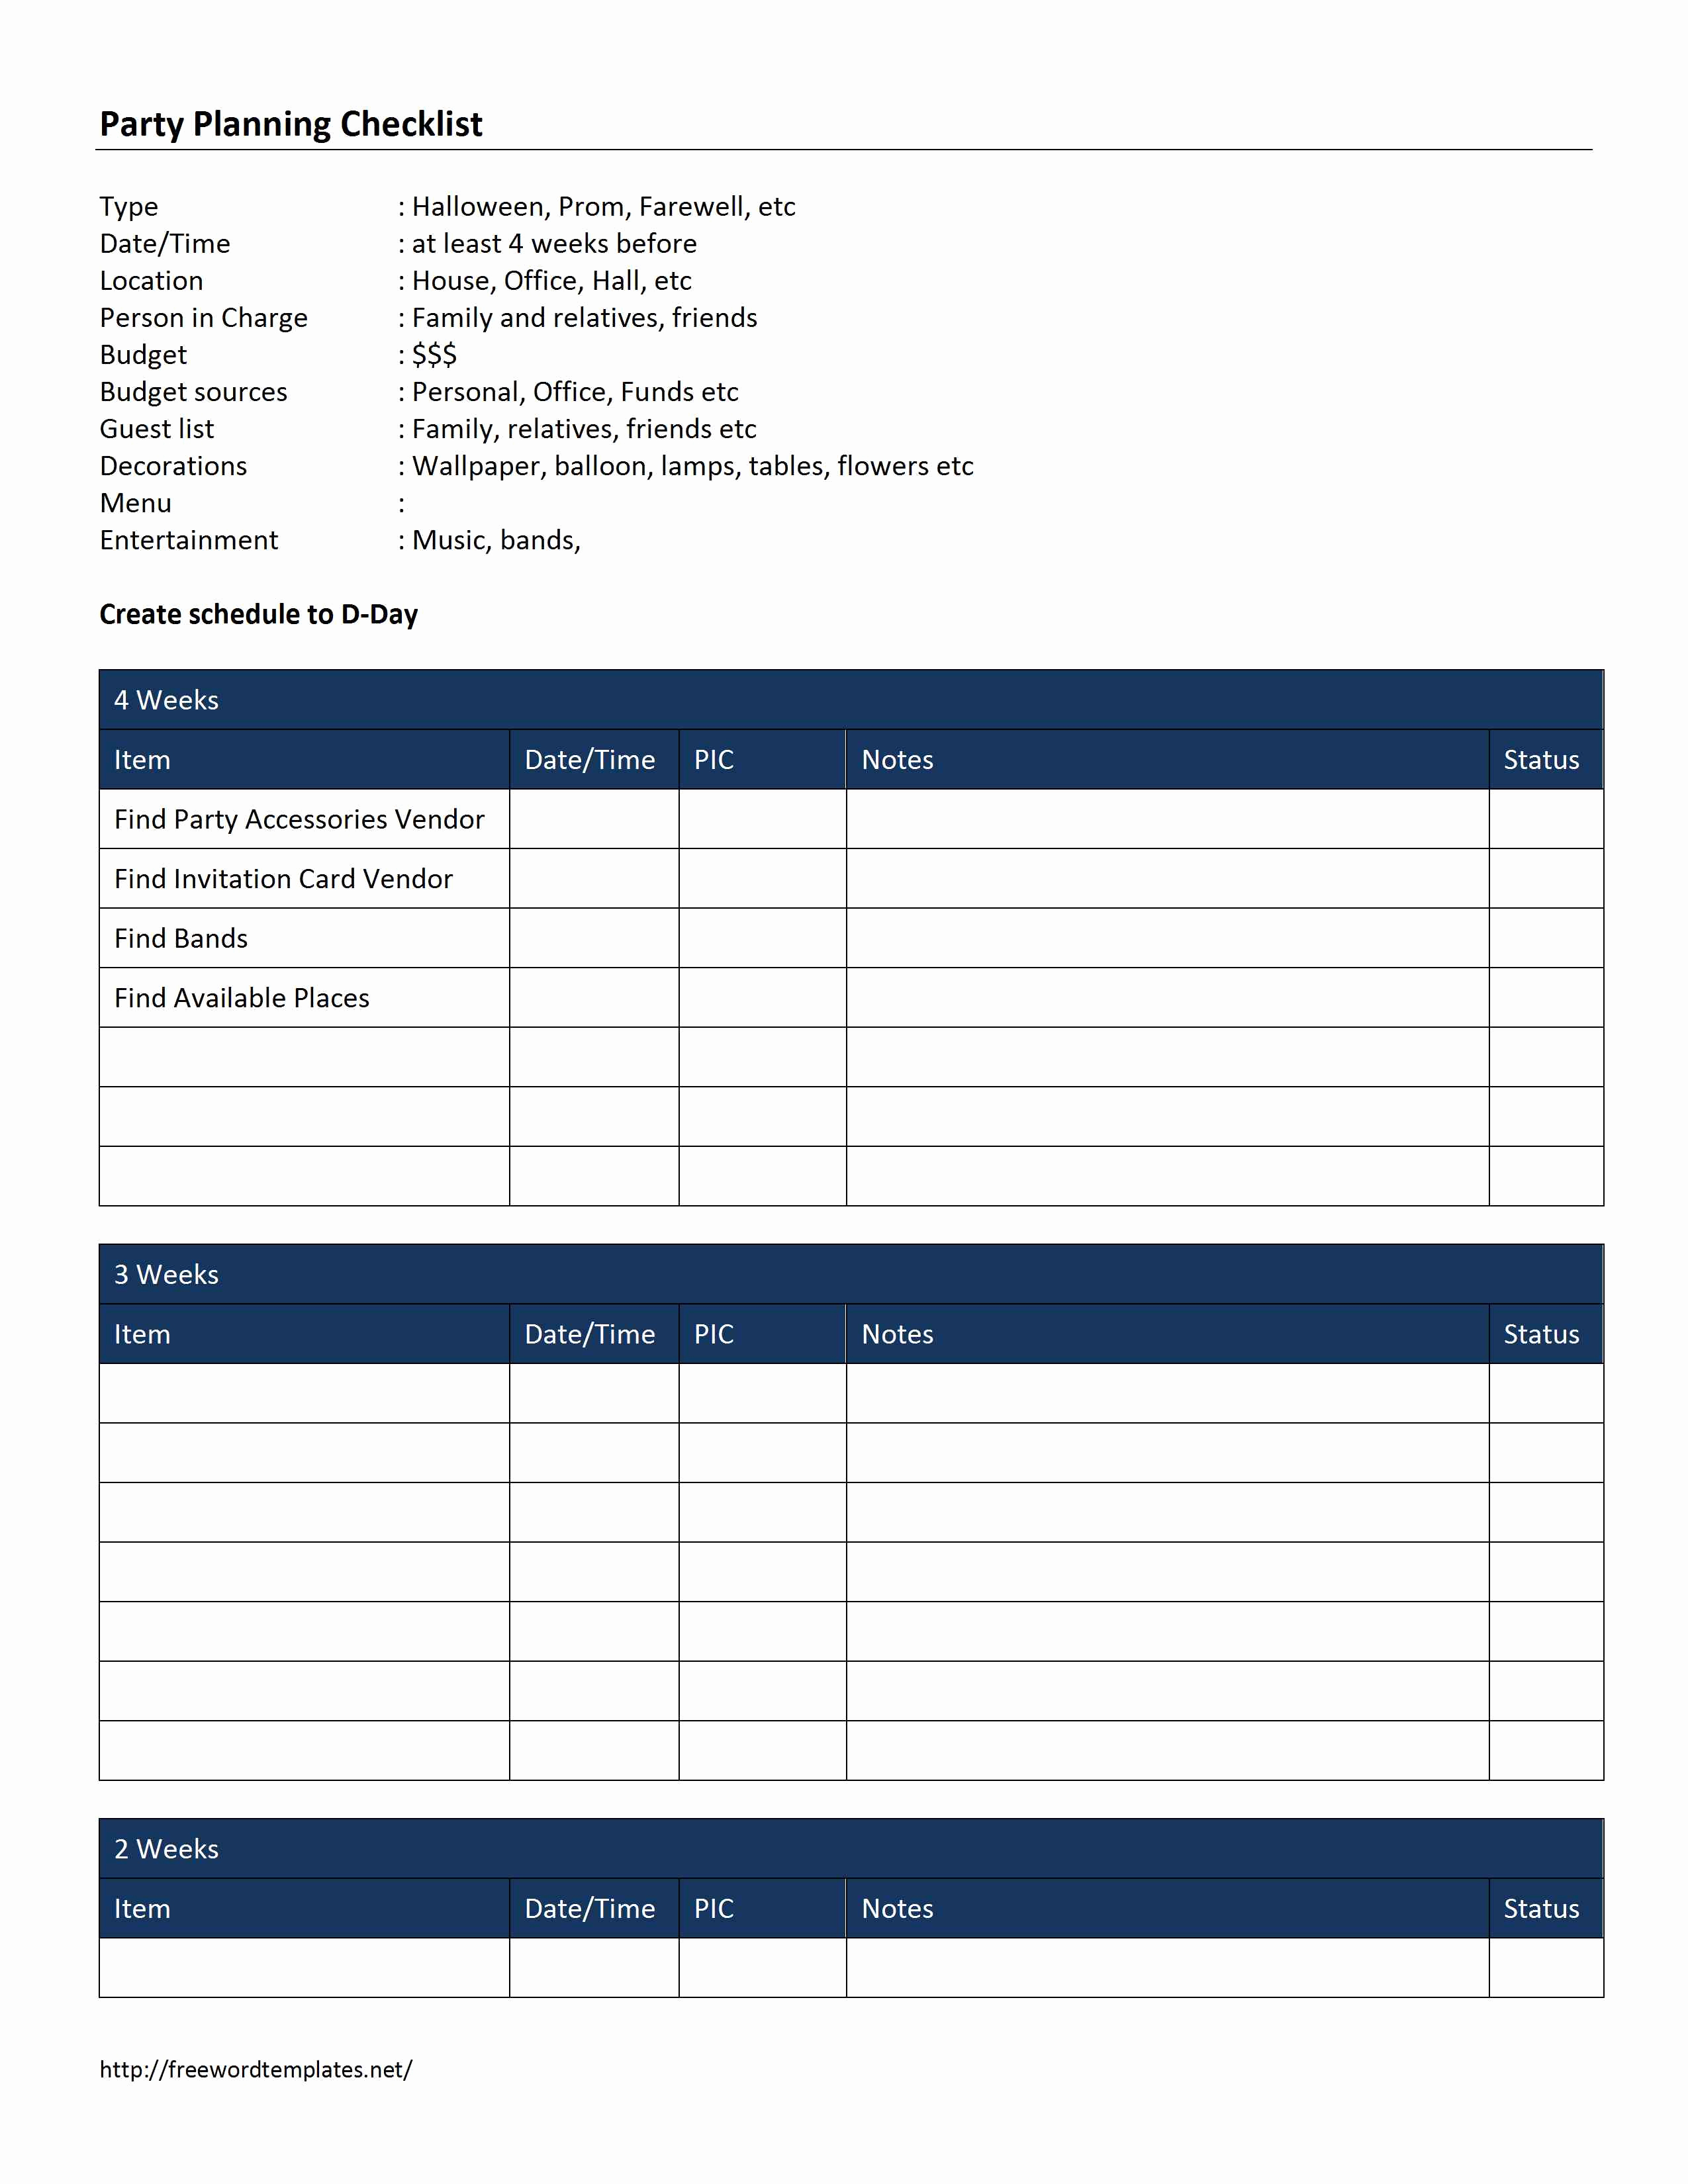 Checklist Word Templates Free Word Templates